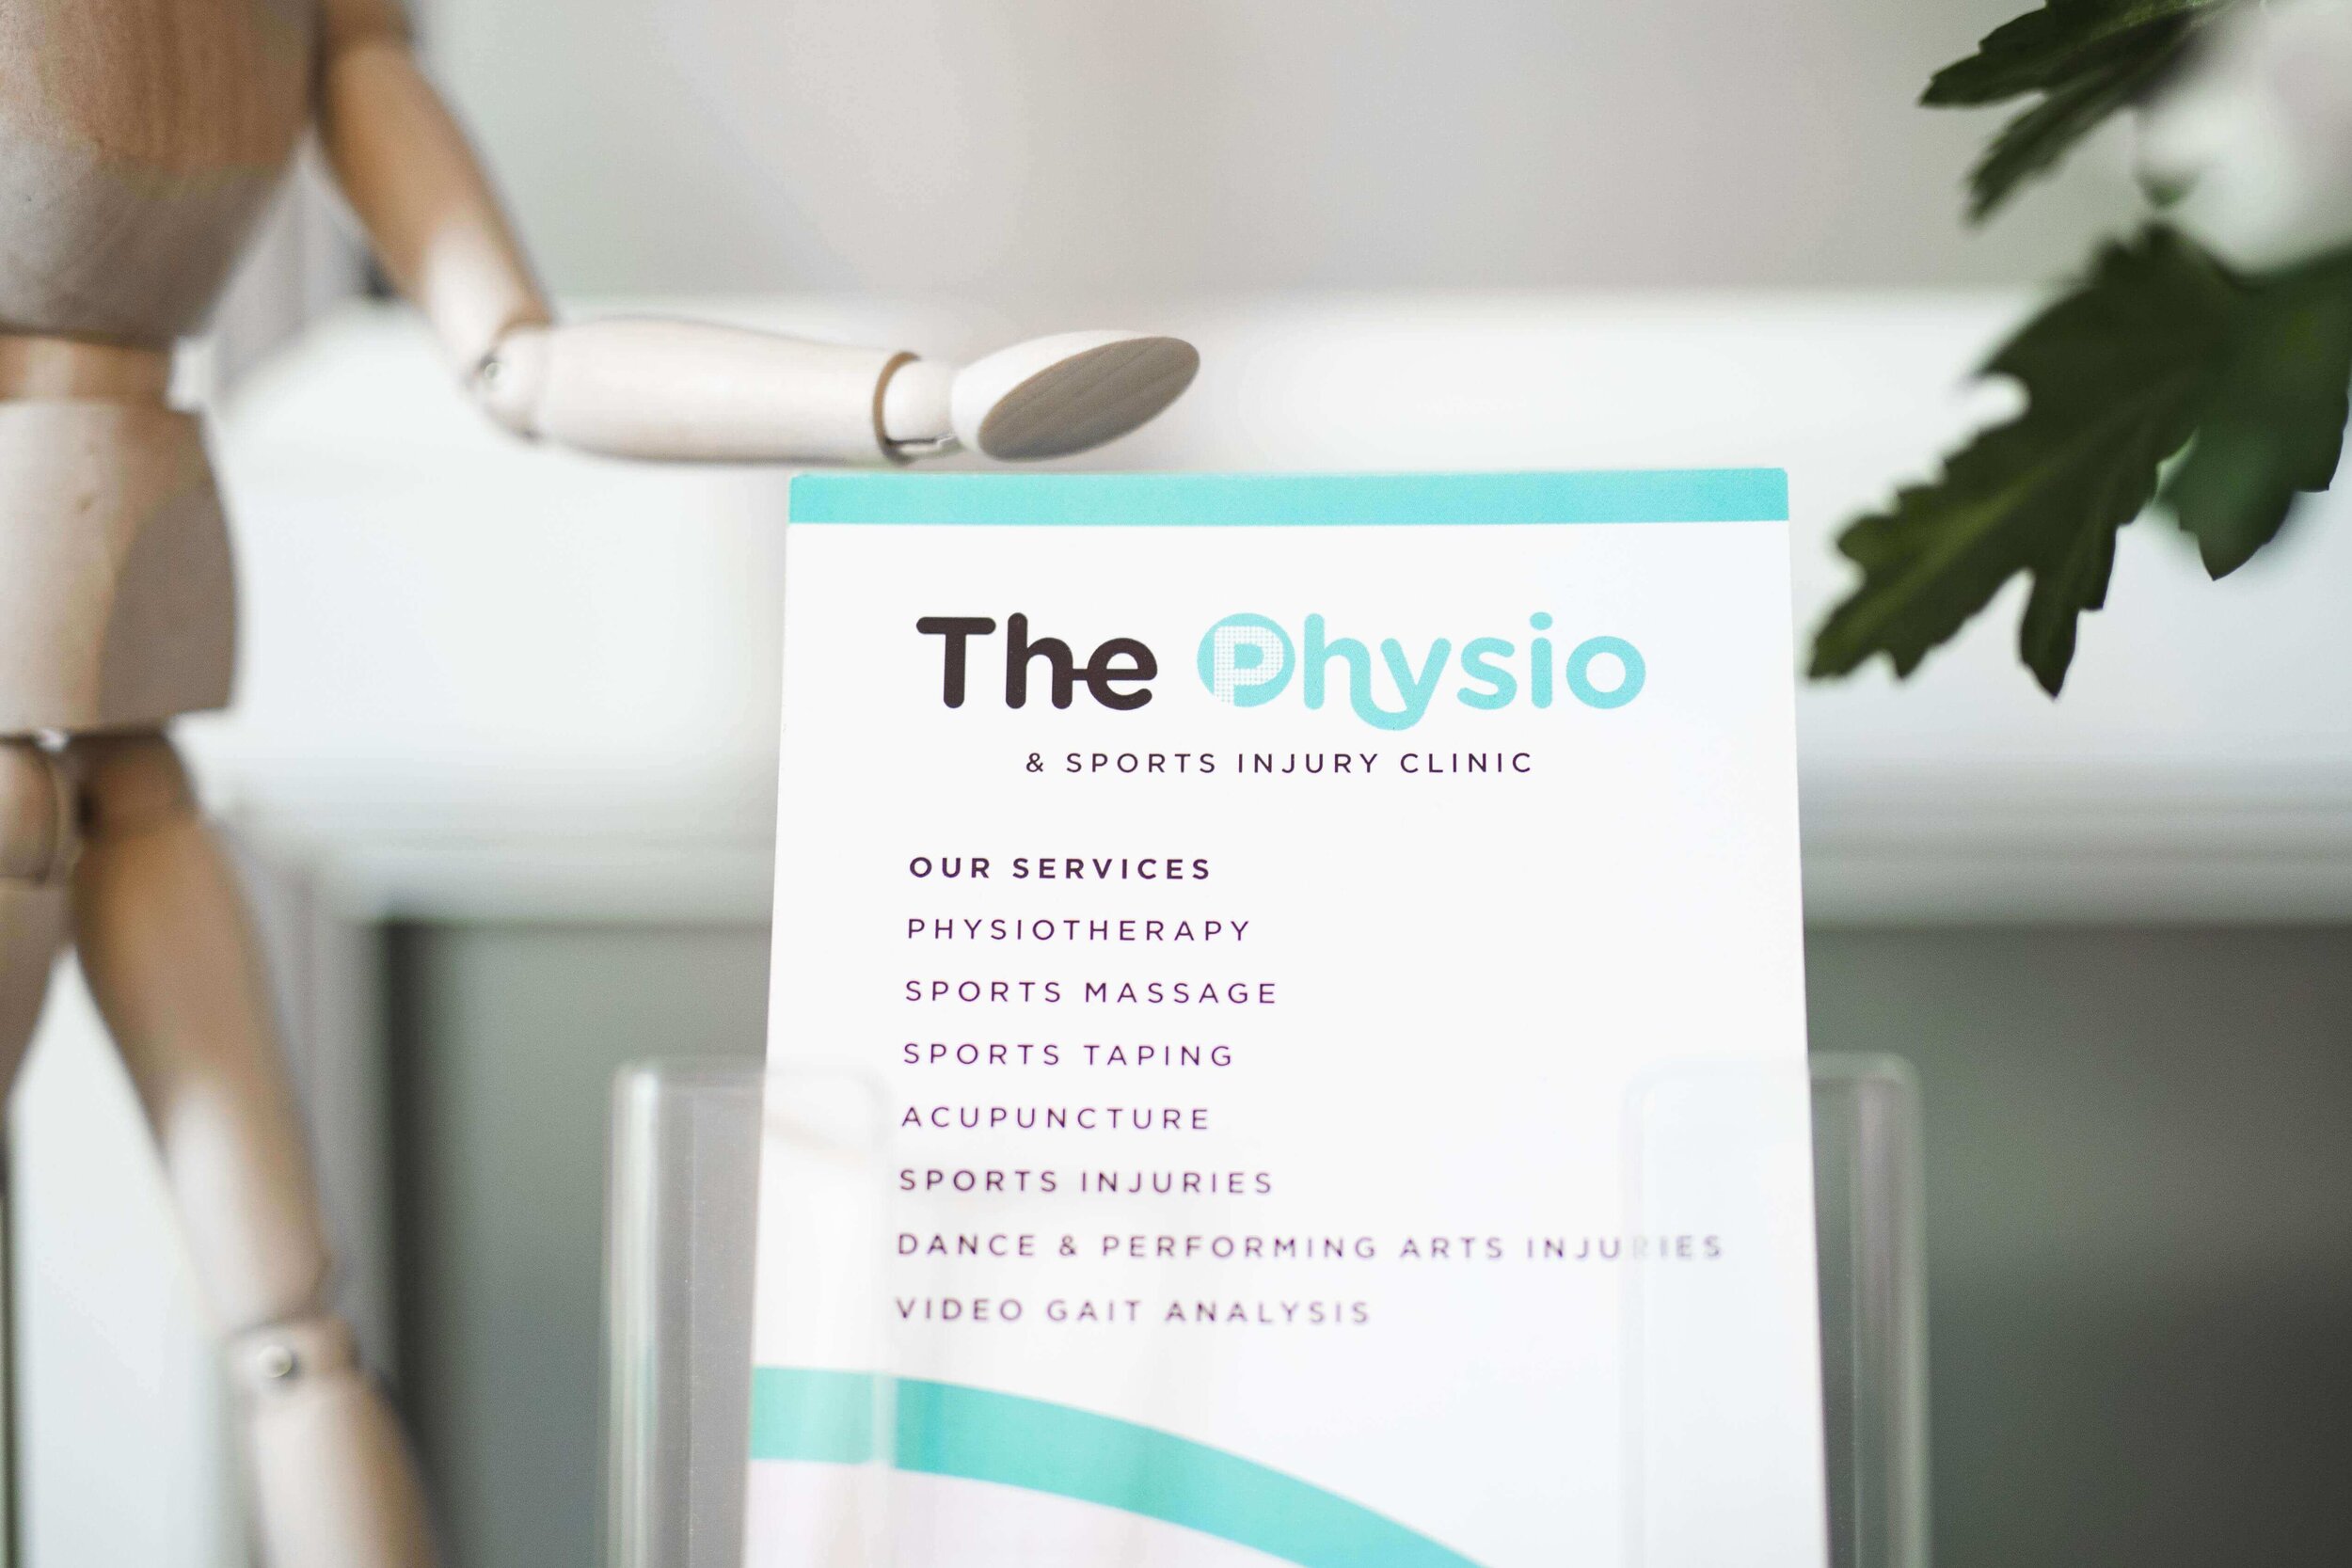 Our services available at The Physio and Sports Injury Clinic